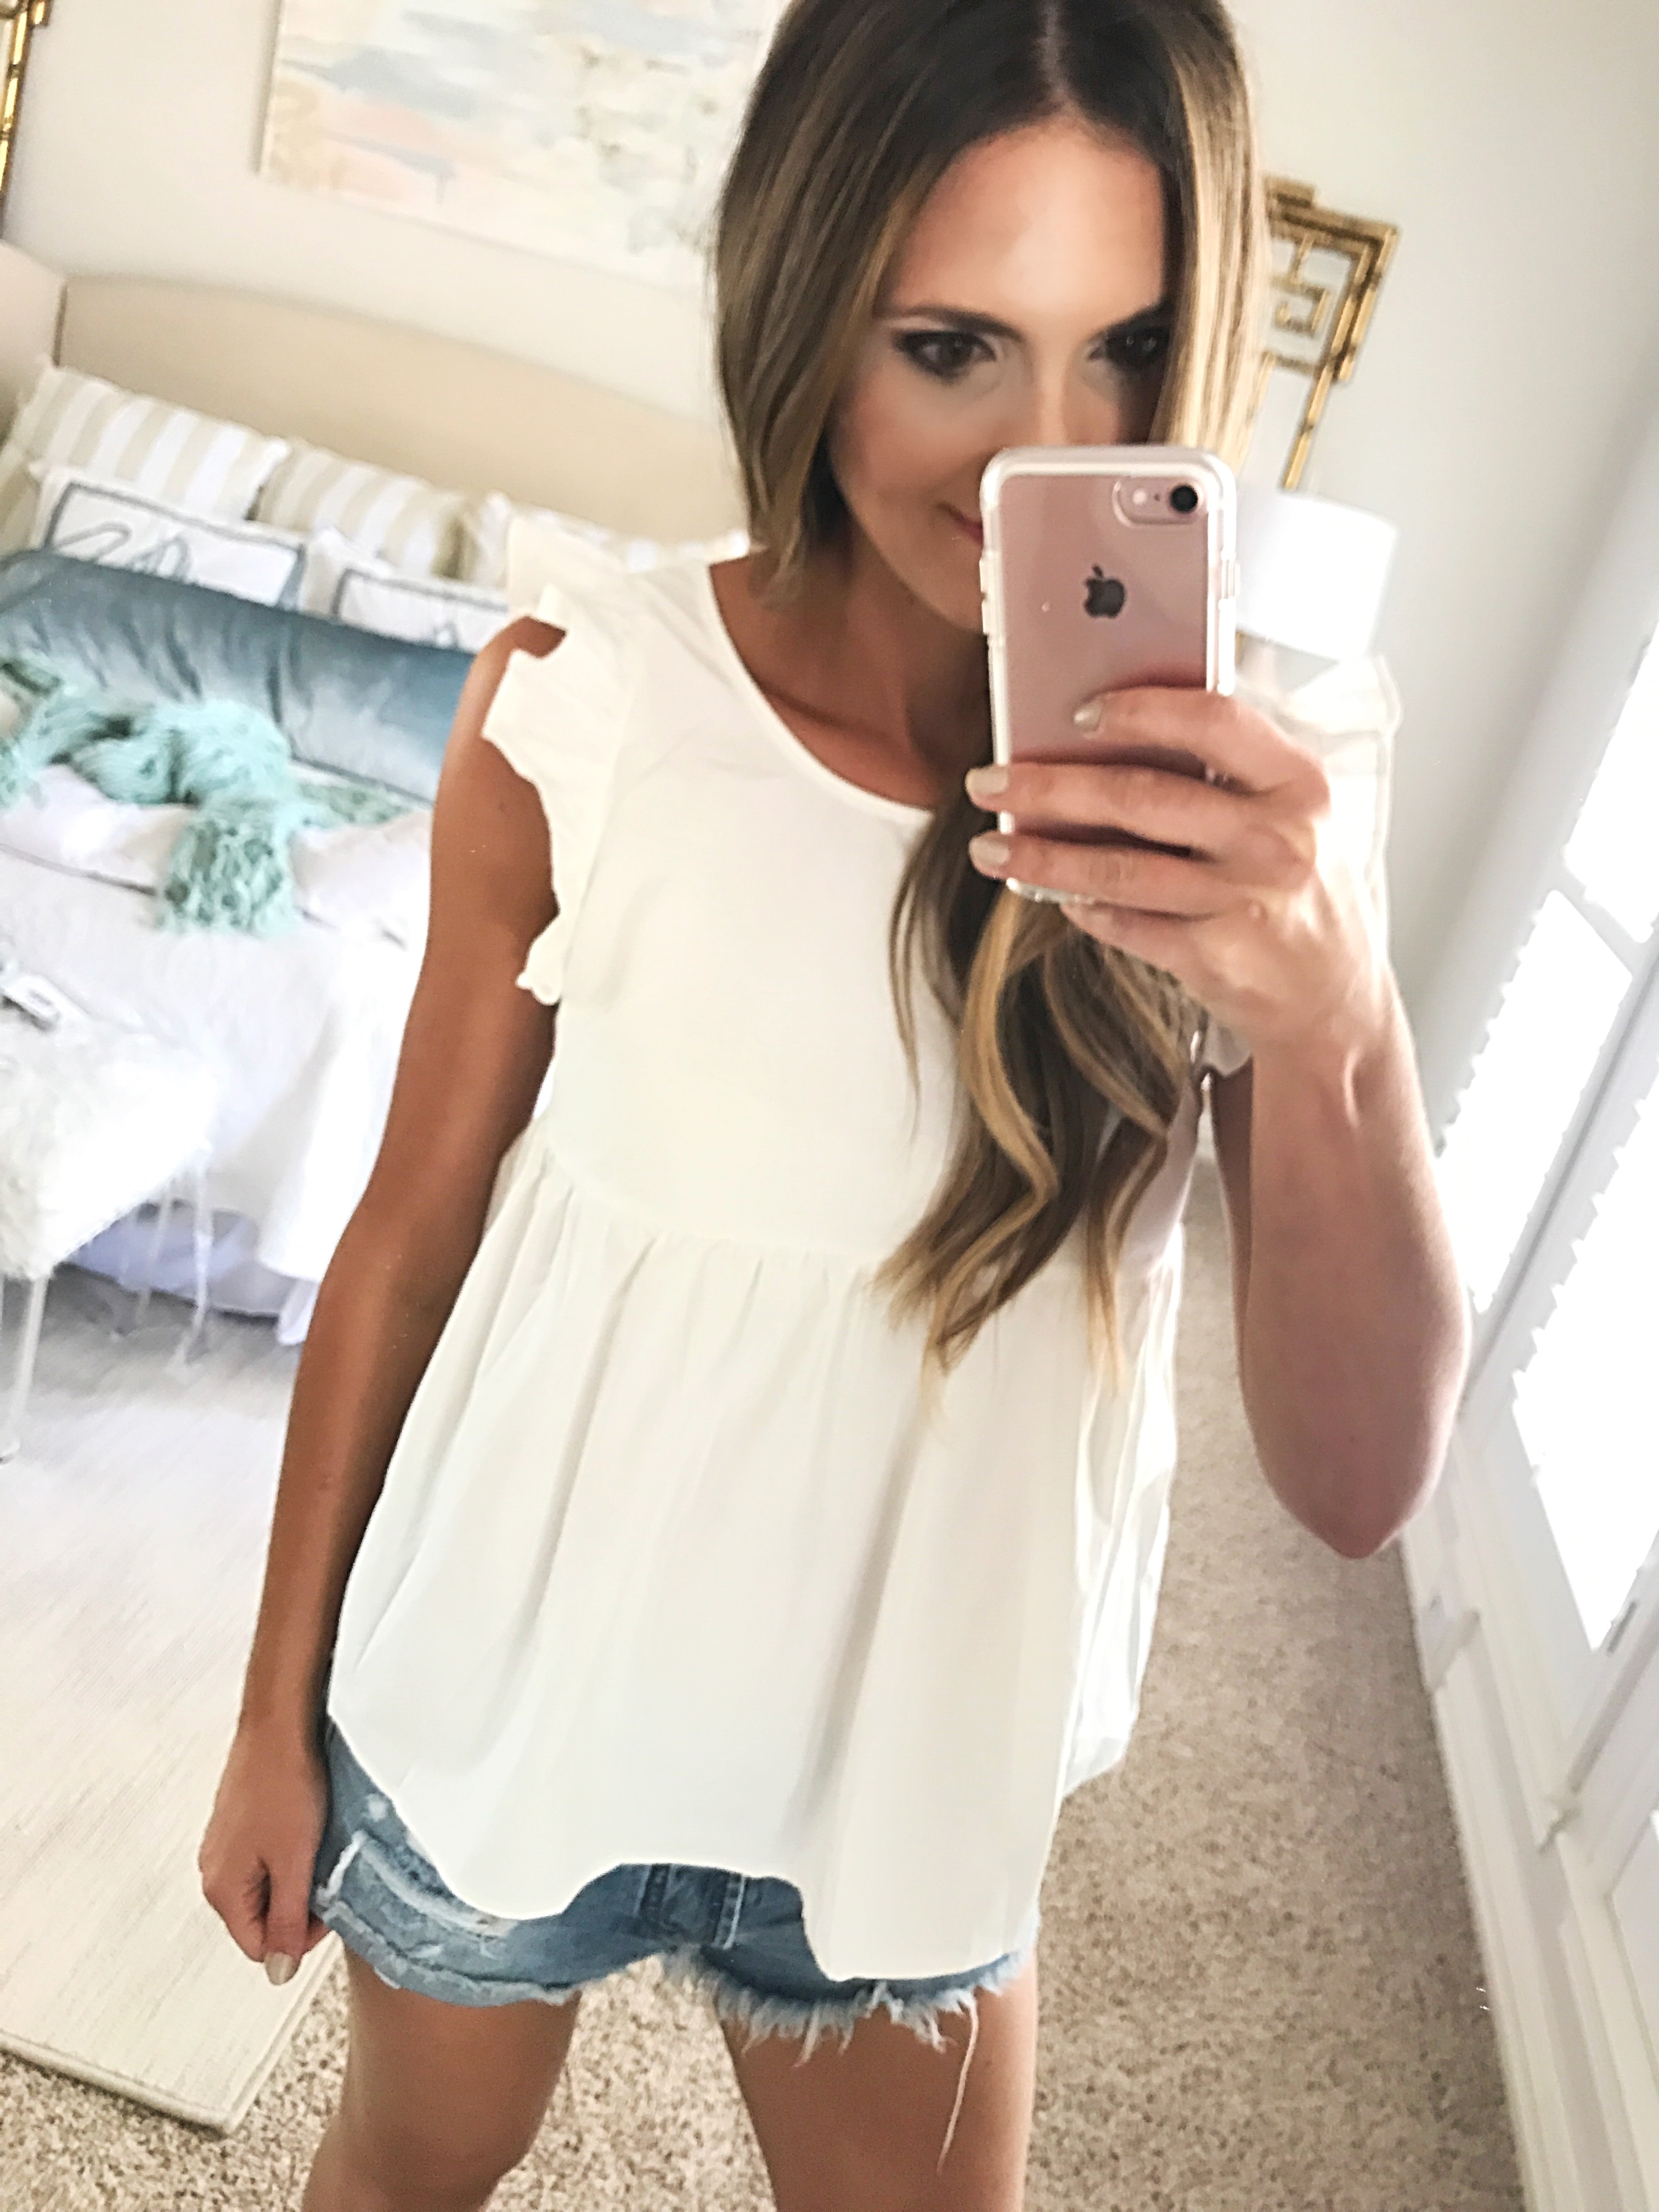 Amazon Prime Day Sale Fashion Haul - Top 10 Most Purchased Items- JULY! featured by popular Dallas fashion blogger Style Your Senses